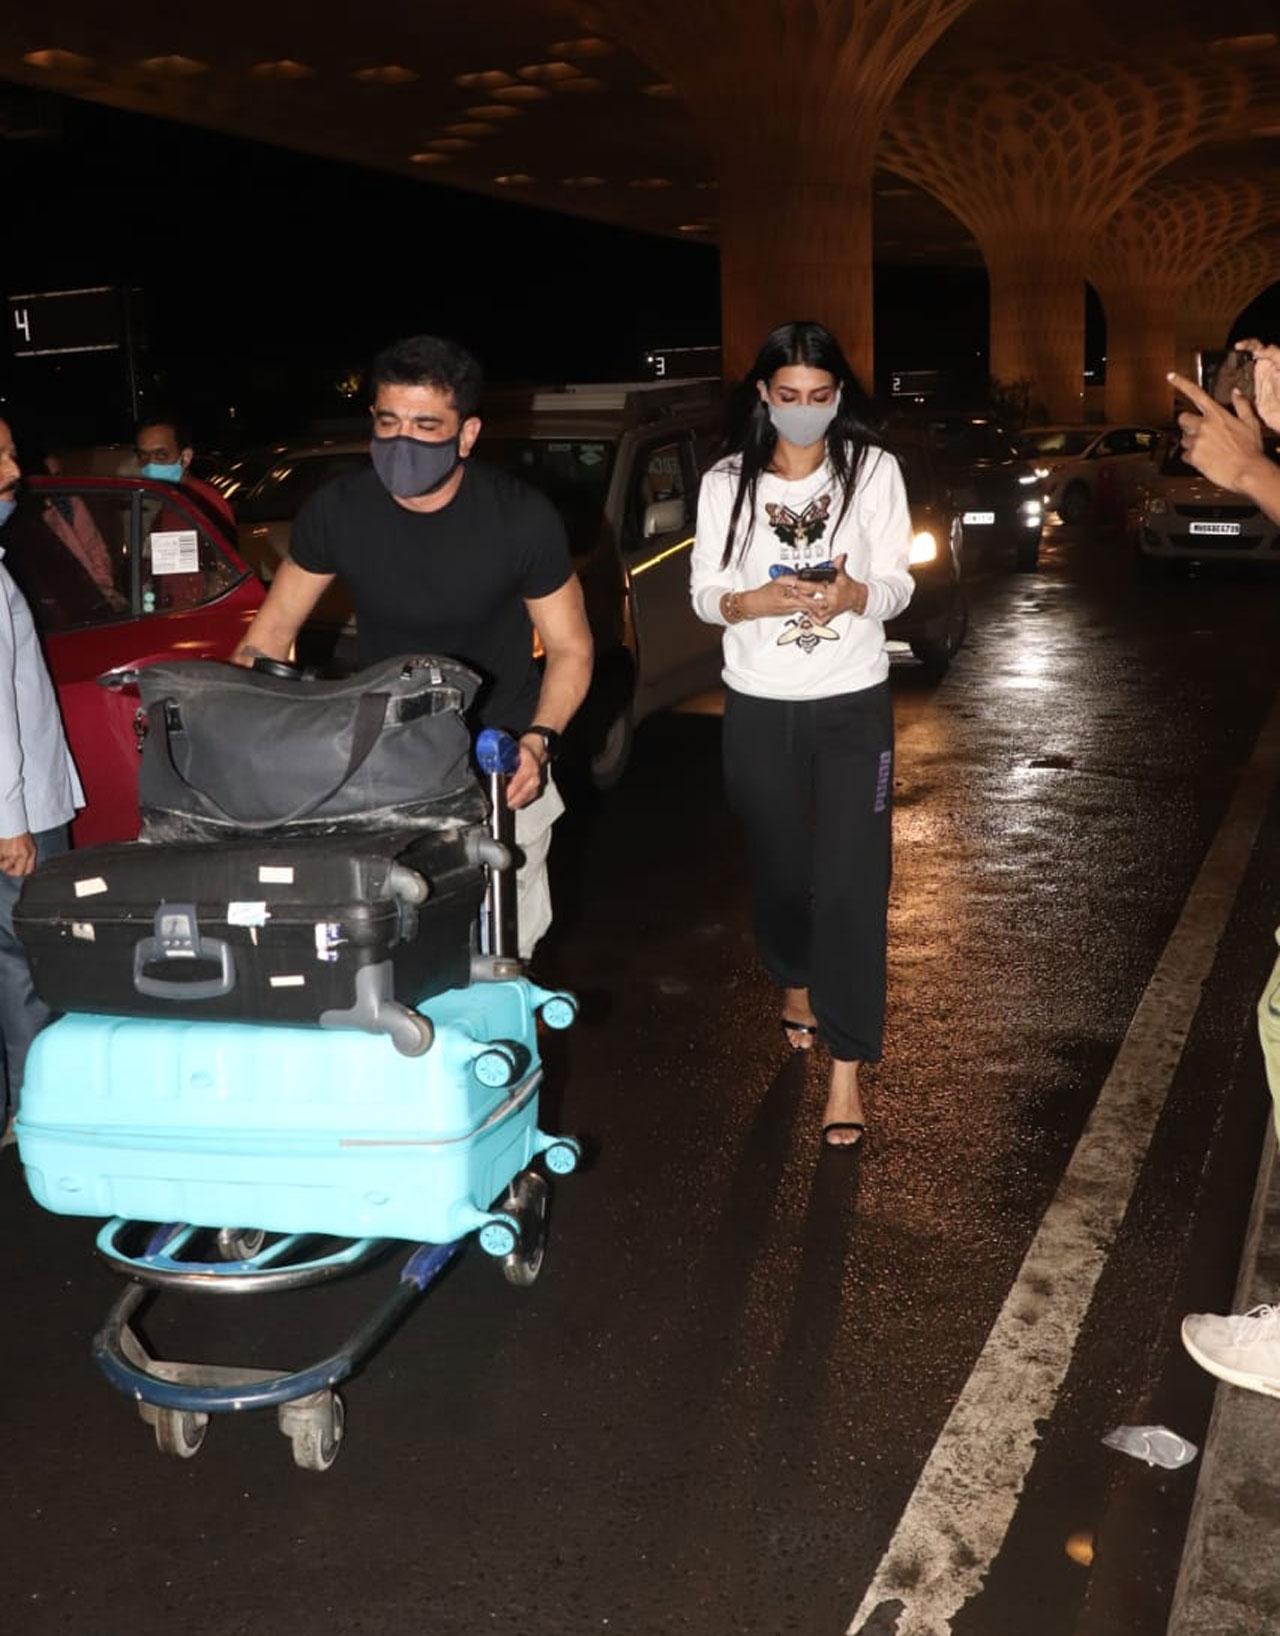 Eijaz Khan and Pavitra Punia were seen arriving at the airport. Last year, Khan participated in the fourteenth season of 'Bigg Boss' and quickly became one of the favourite contestants. He has shared how the popular show has affected his life as his fans got to know a more personal side of him when he participated in the reality show.